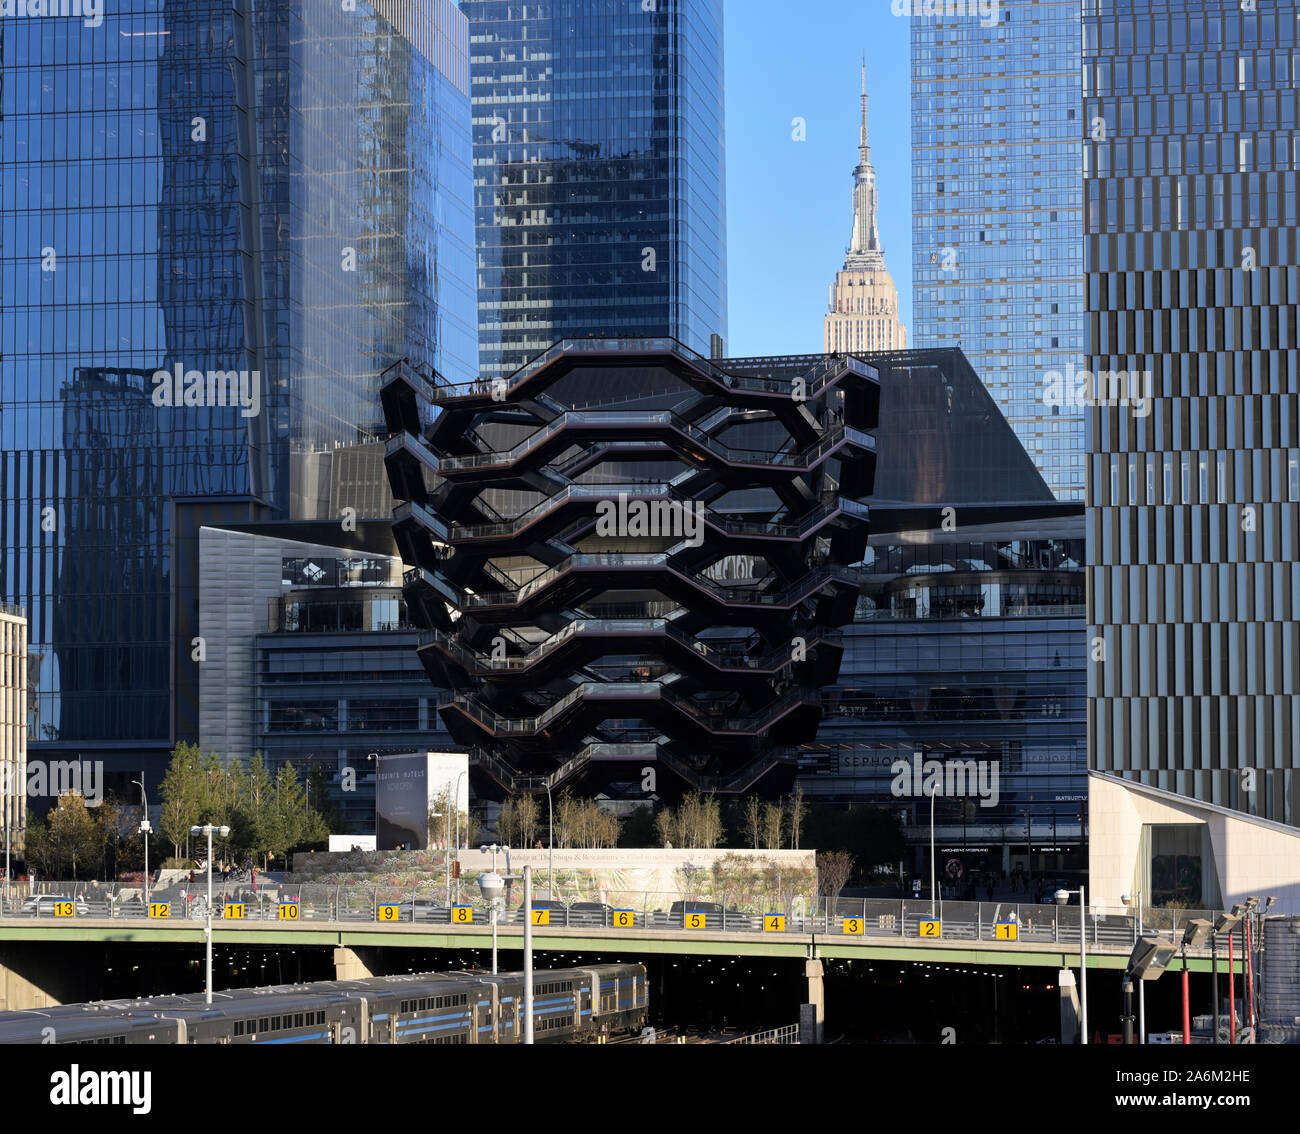 Le navire, Hudson Yards, New York City, NY Banque D'Images